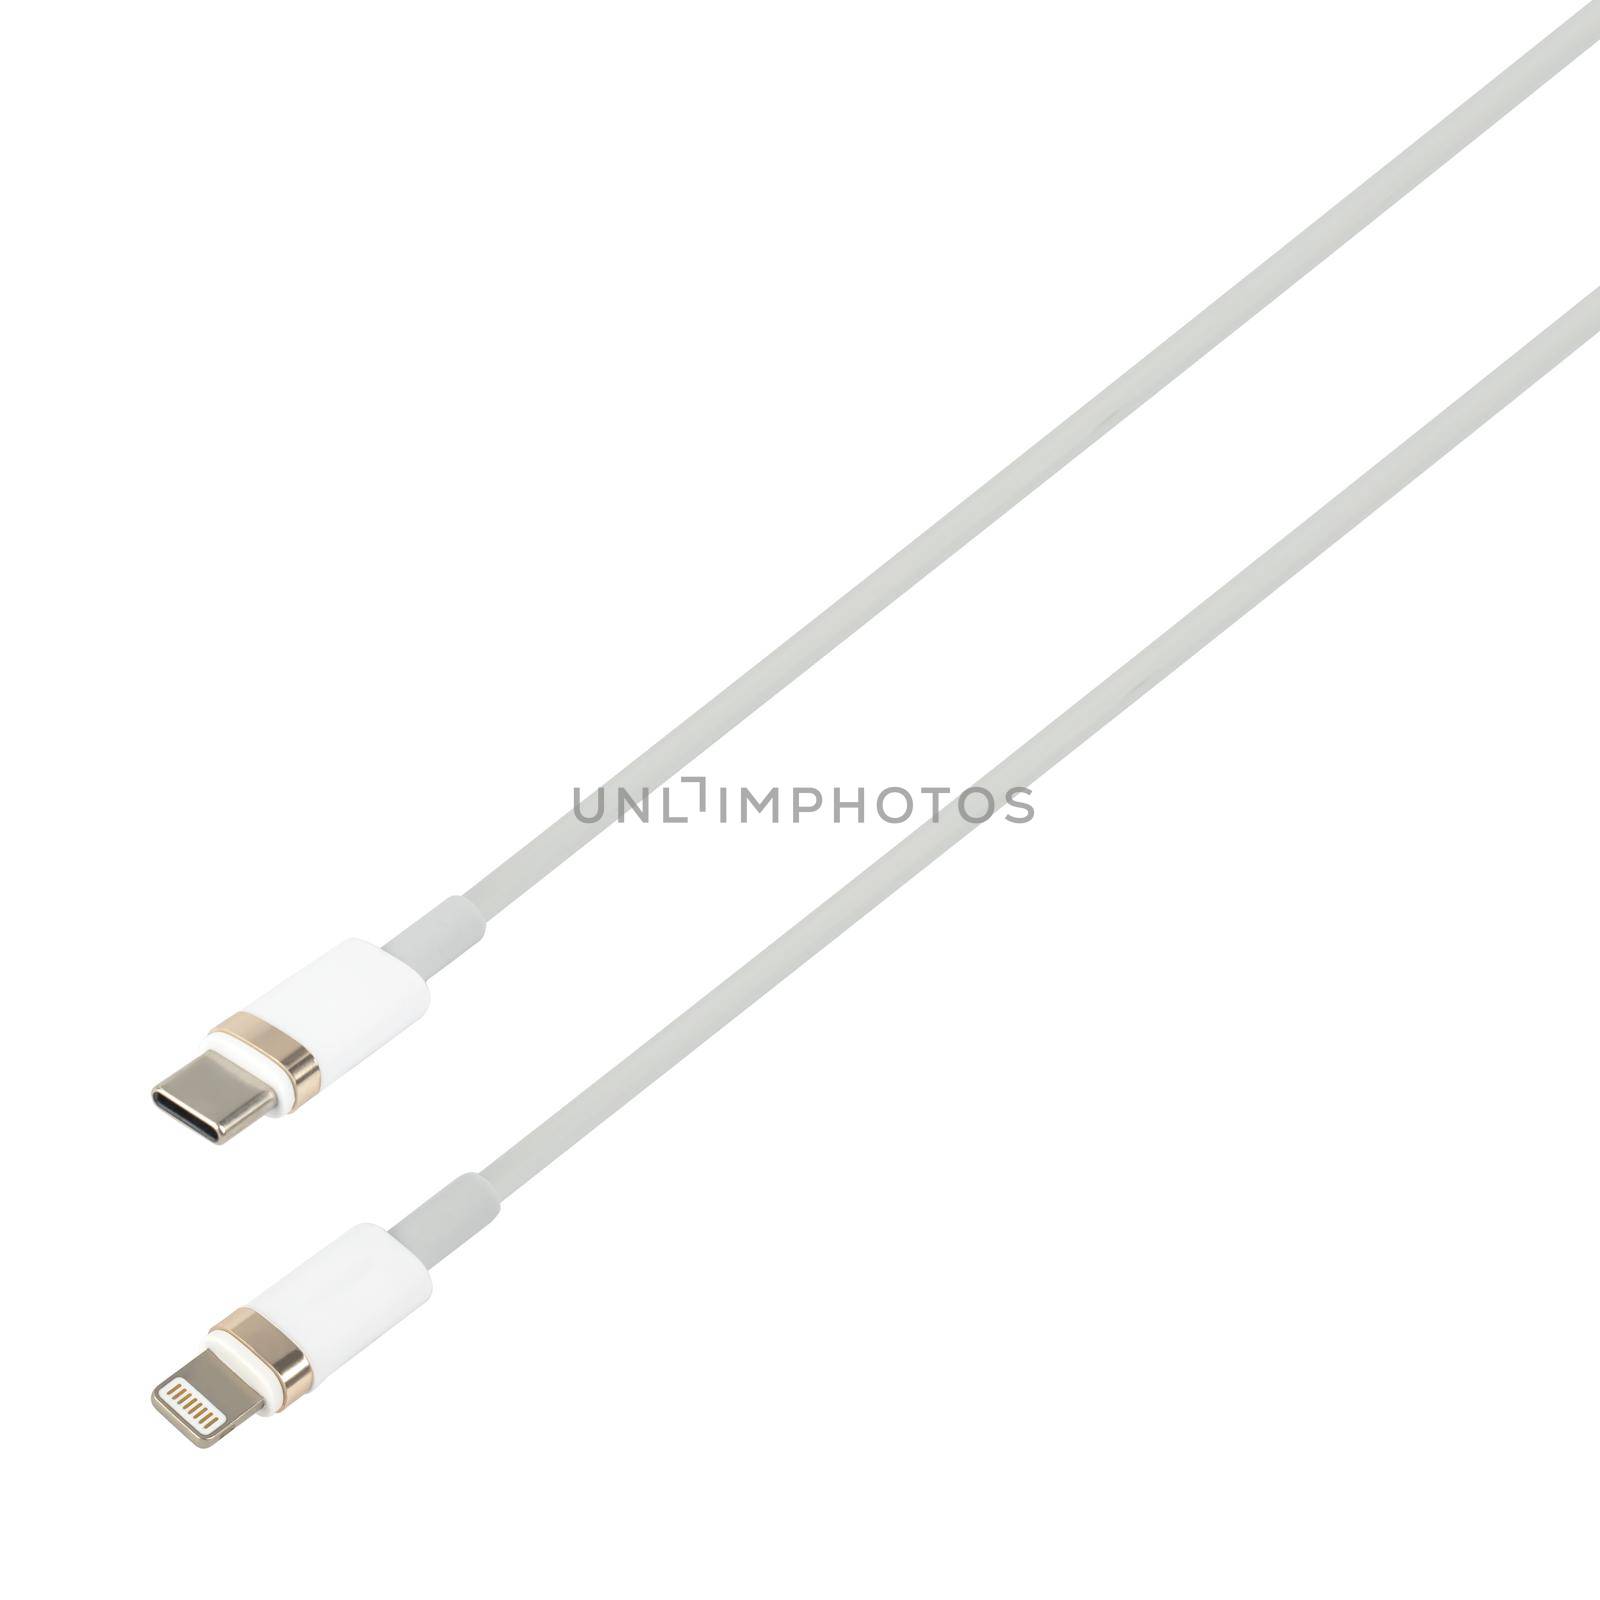 cable with Type-C and Lightning connector, isolated on white background by A_A